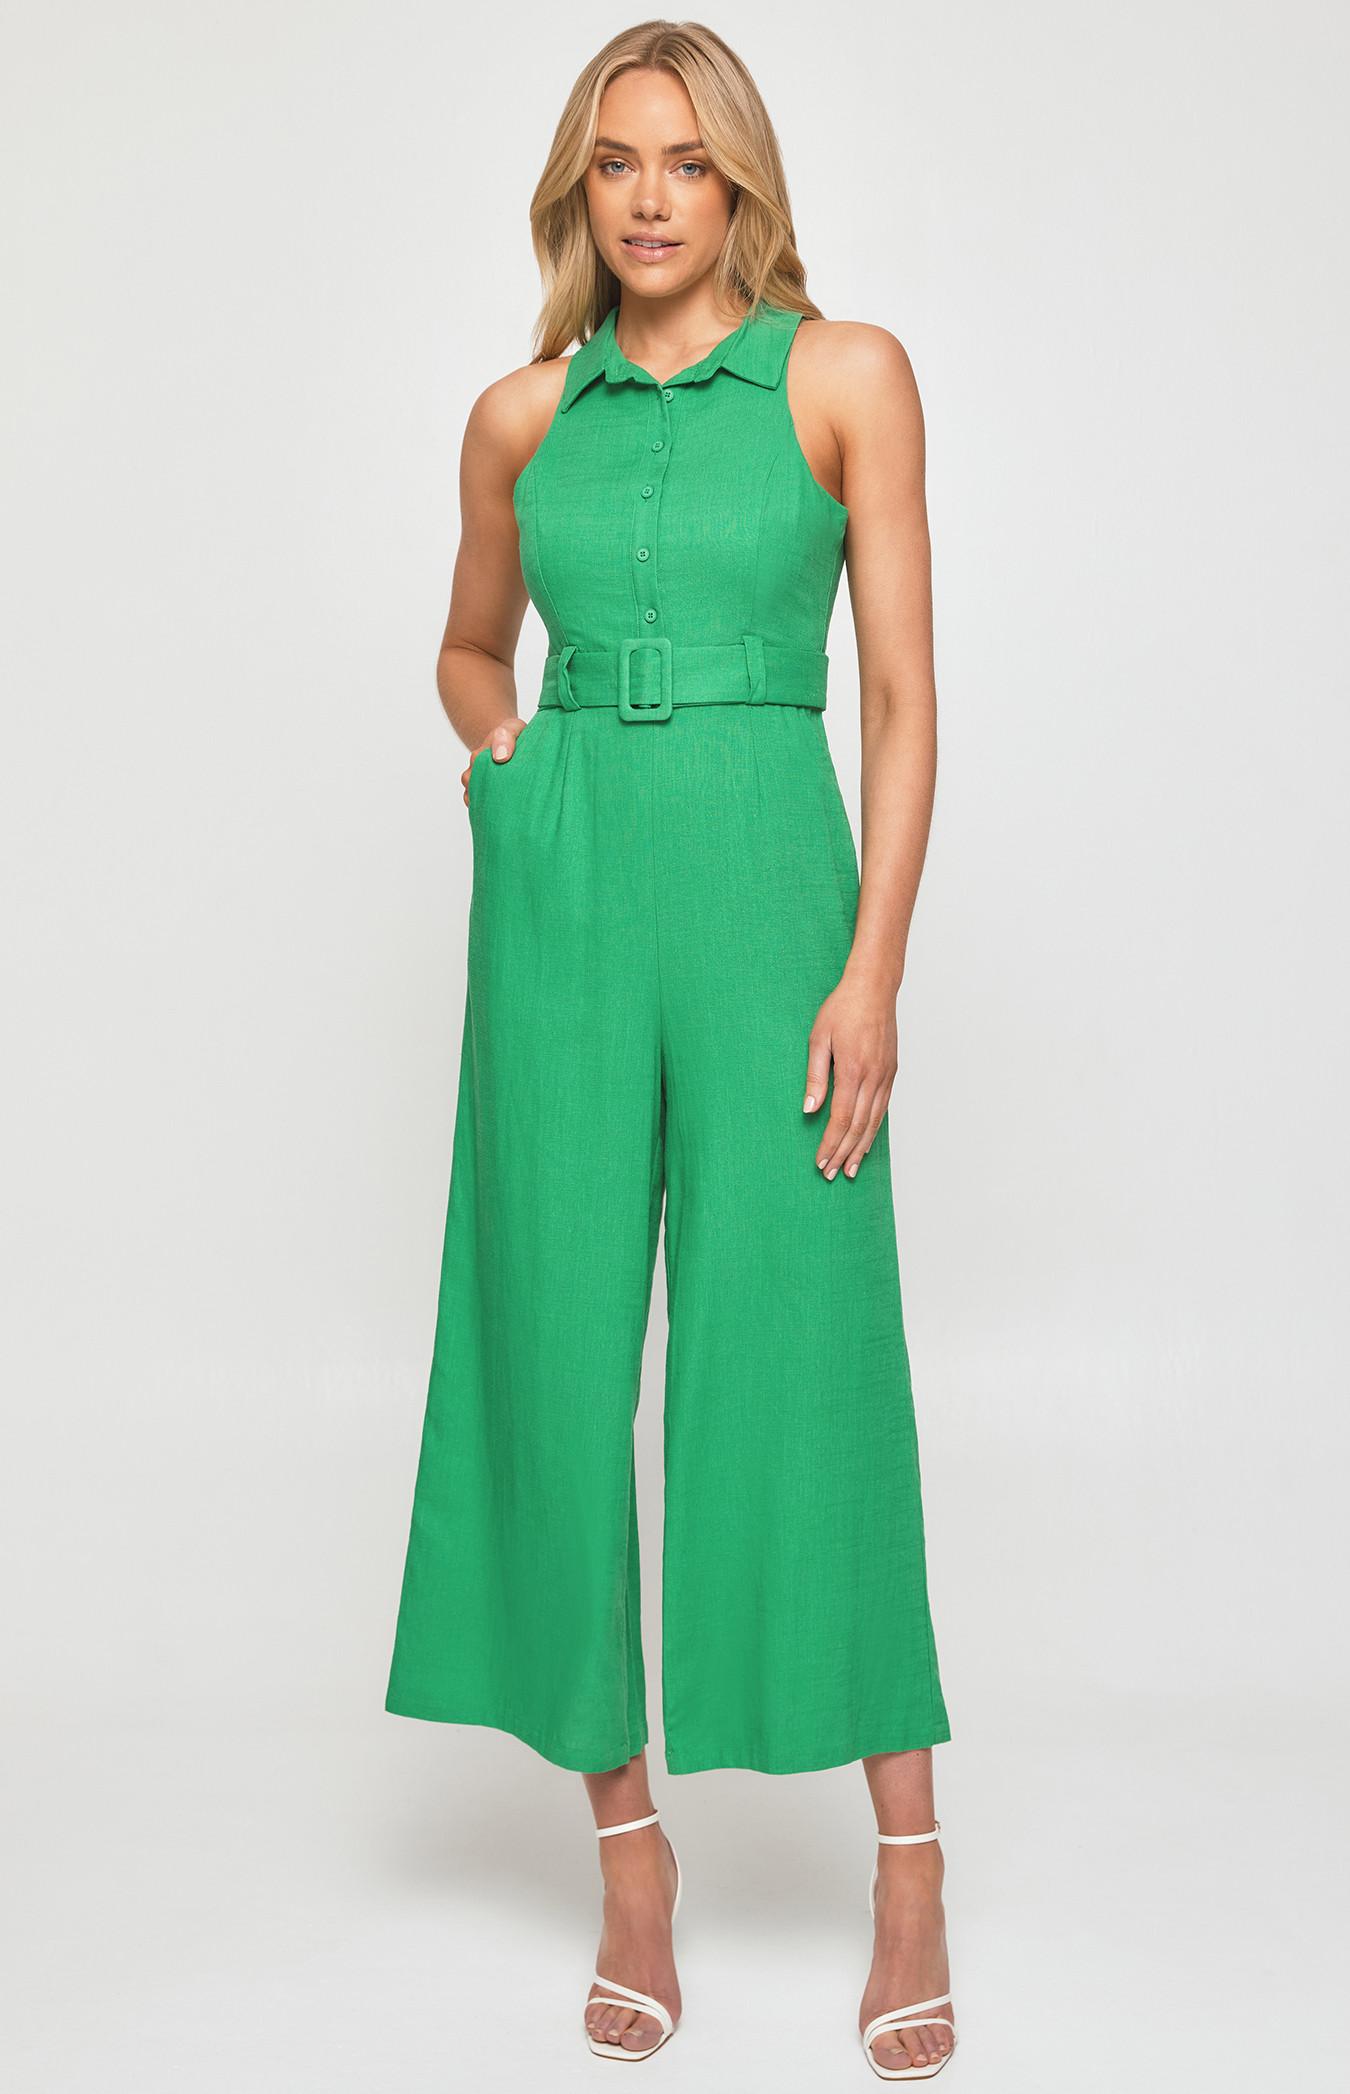 Textured Collared Jumpsuit with Front Button and Buckle Details (SJP509B)